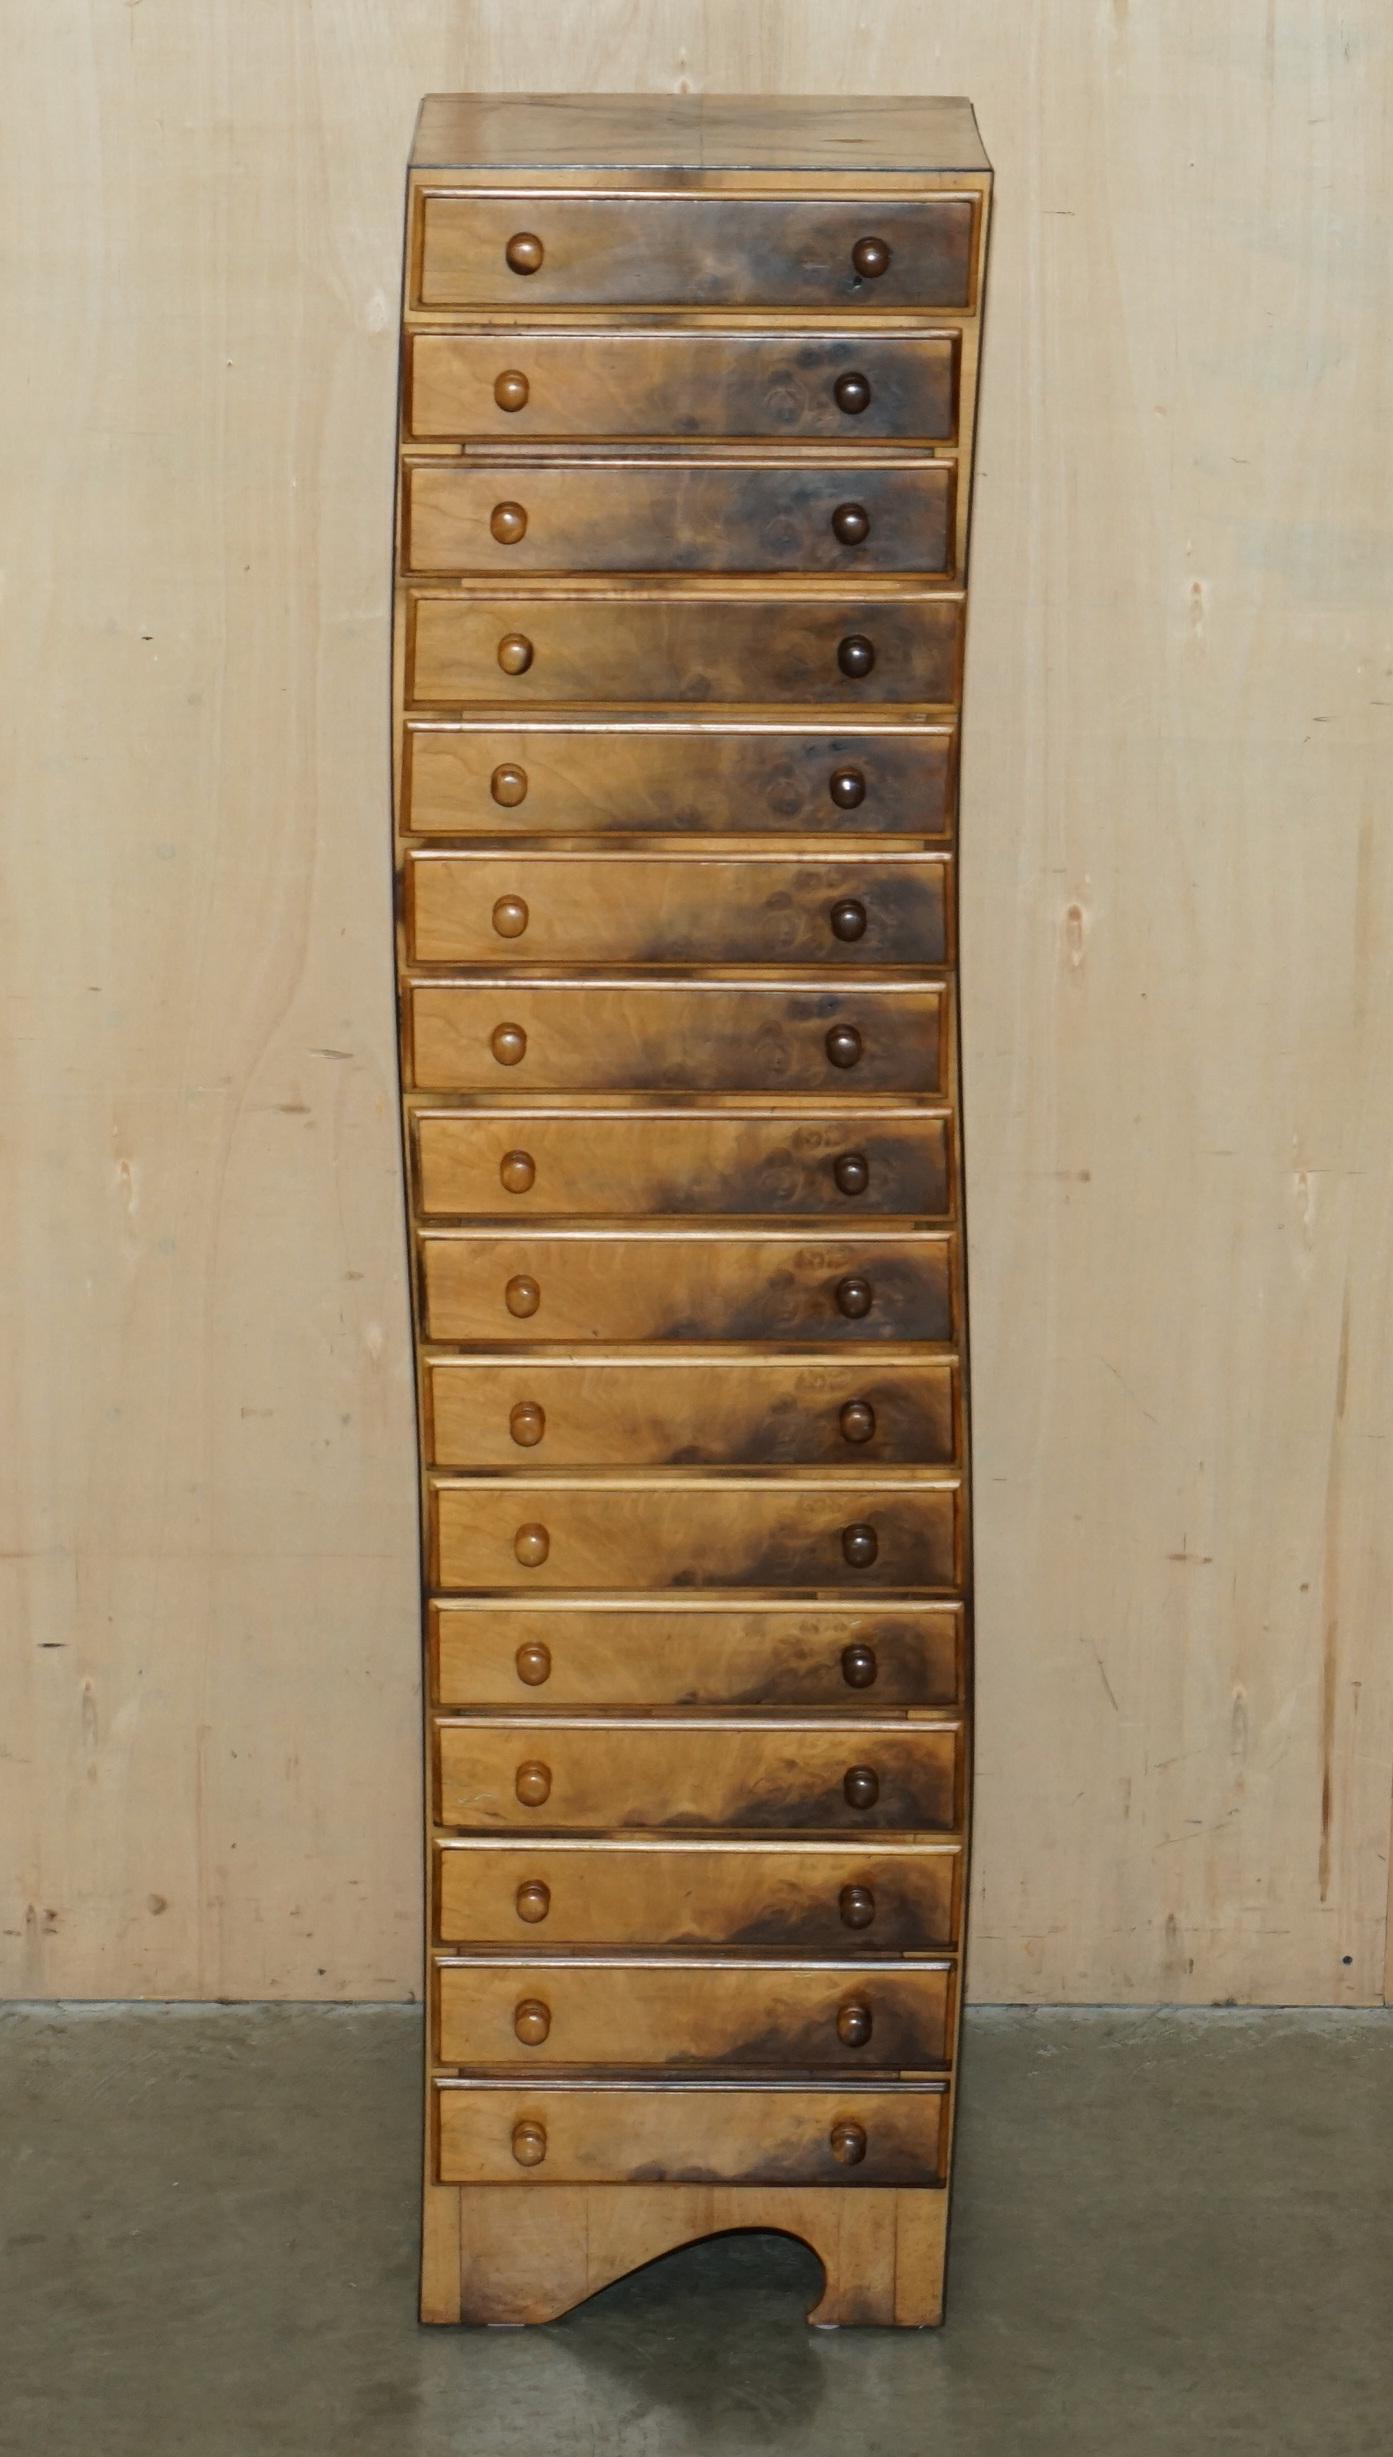 Country ALTHORP ESTATE 1.6 METER SERPENTINE GRADUATED DRAWER TALLBOY CHEST OF DRAWERs For Sale